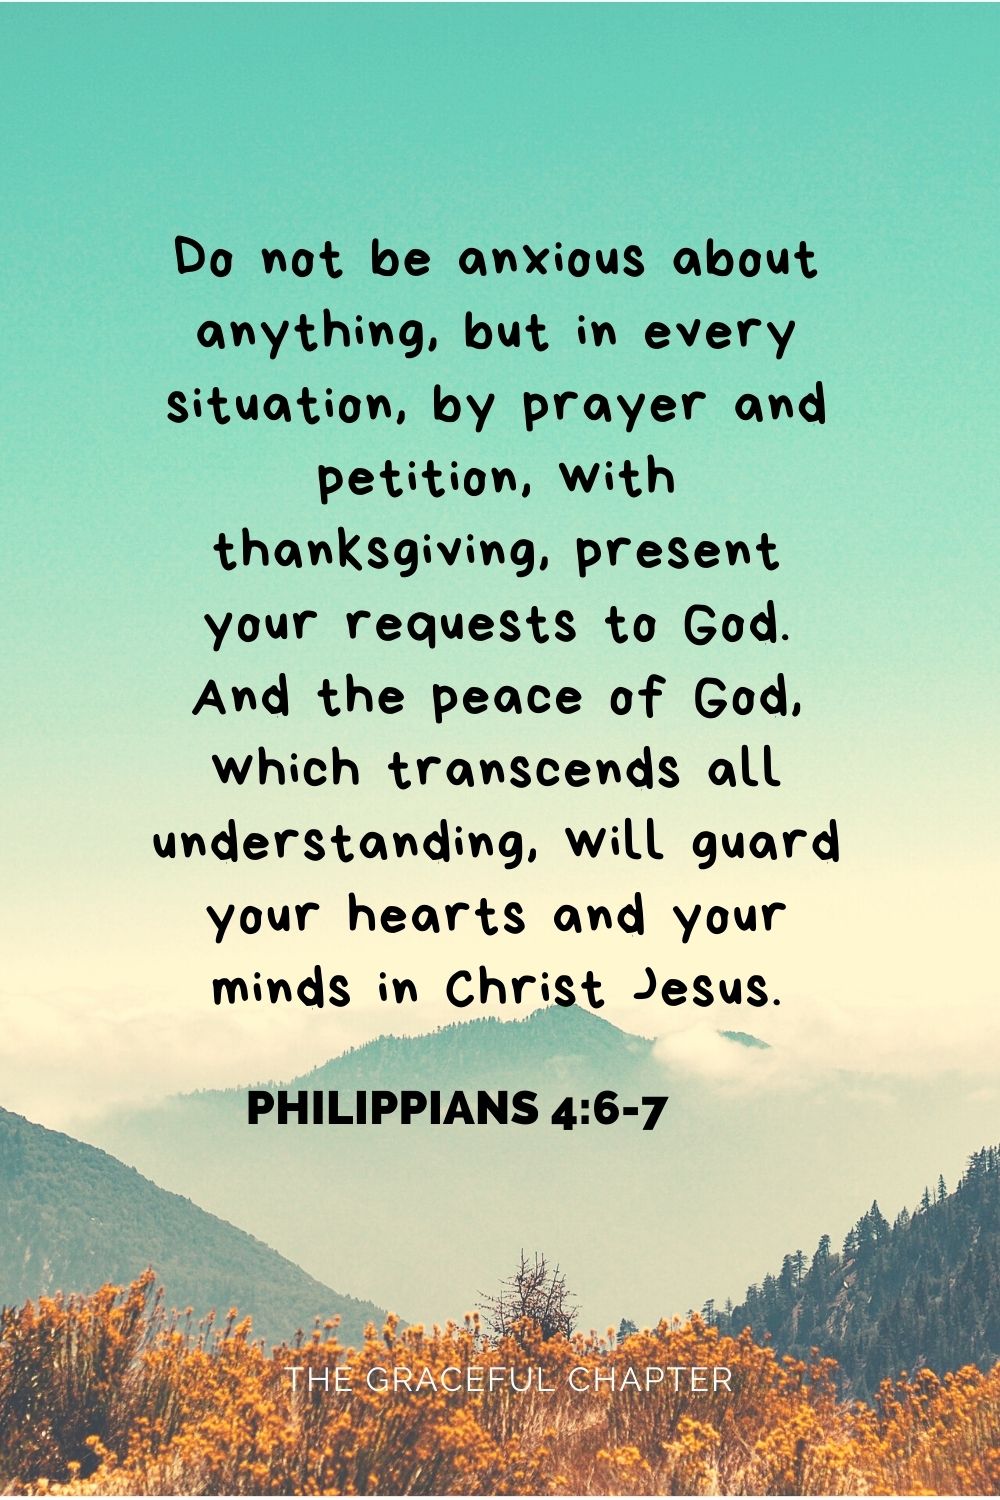 Do not be anxious about anything, but in every situation, by prayer and petition, with thanksgiving, present your requests to God. And the peace of God, which transcends all understanding, will guard your hearts and your minds in Christ Jesus. Philippians 4:6-7